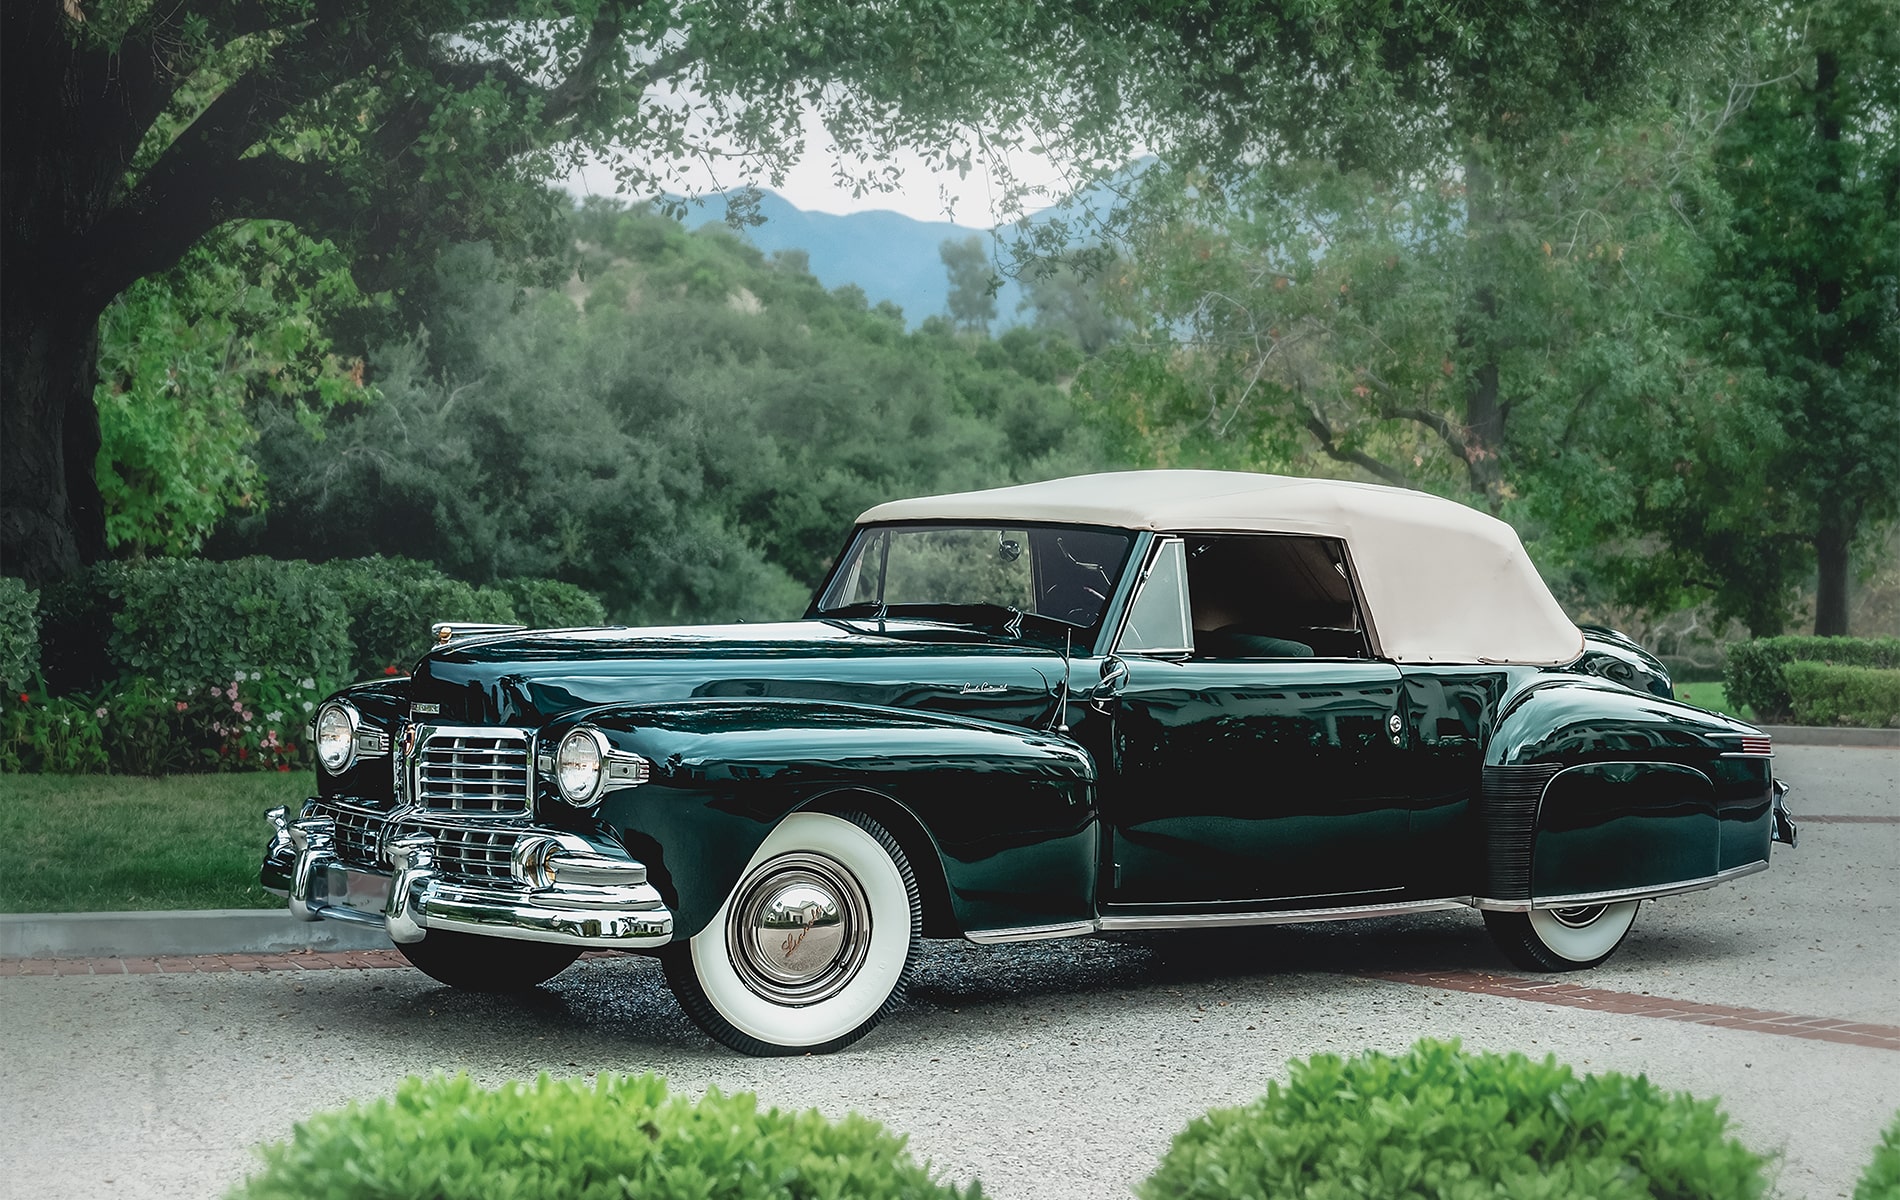 Le monde: Edsel Ford’s Lincoln Continental on Display